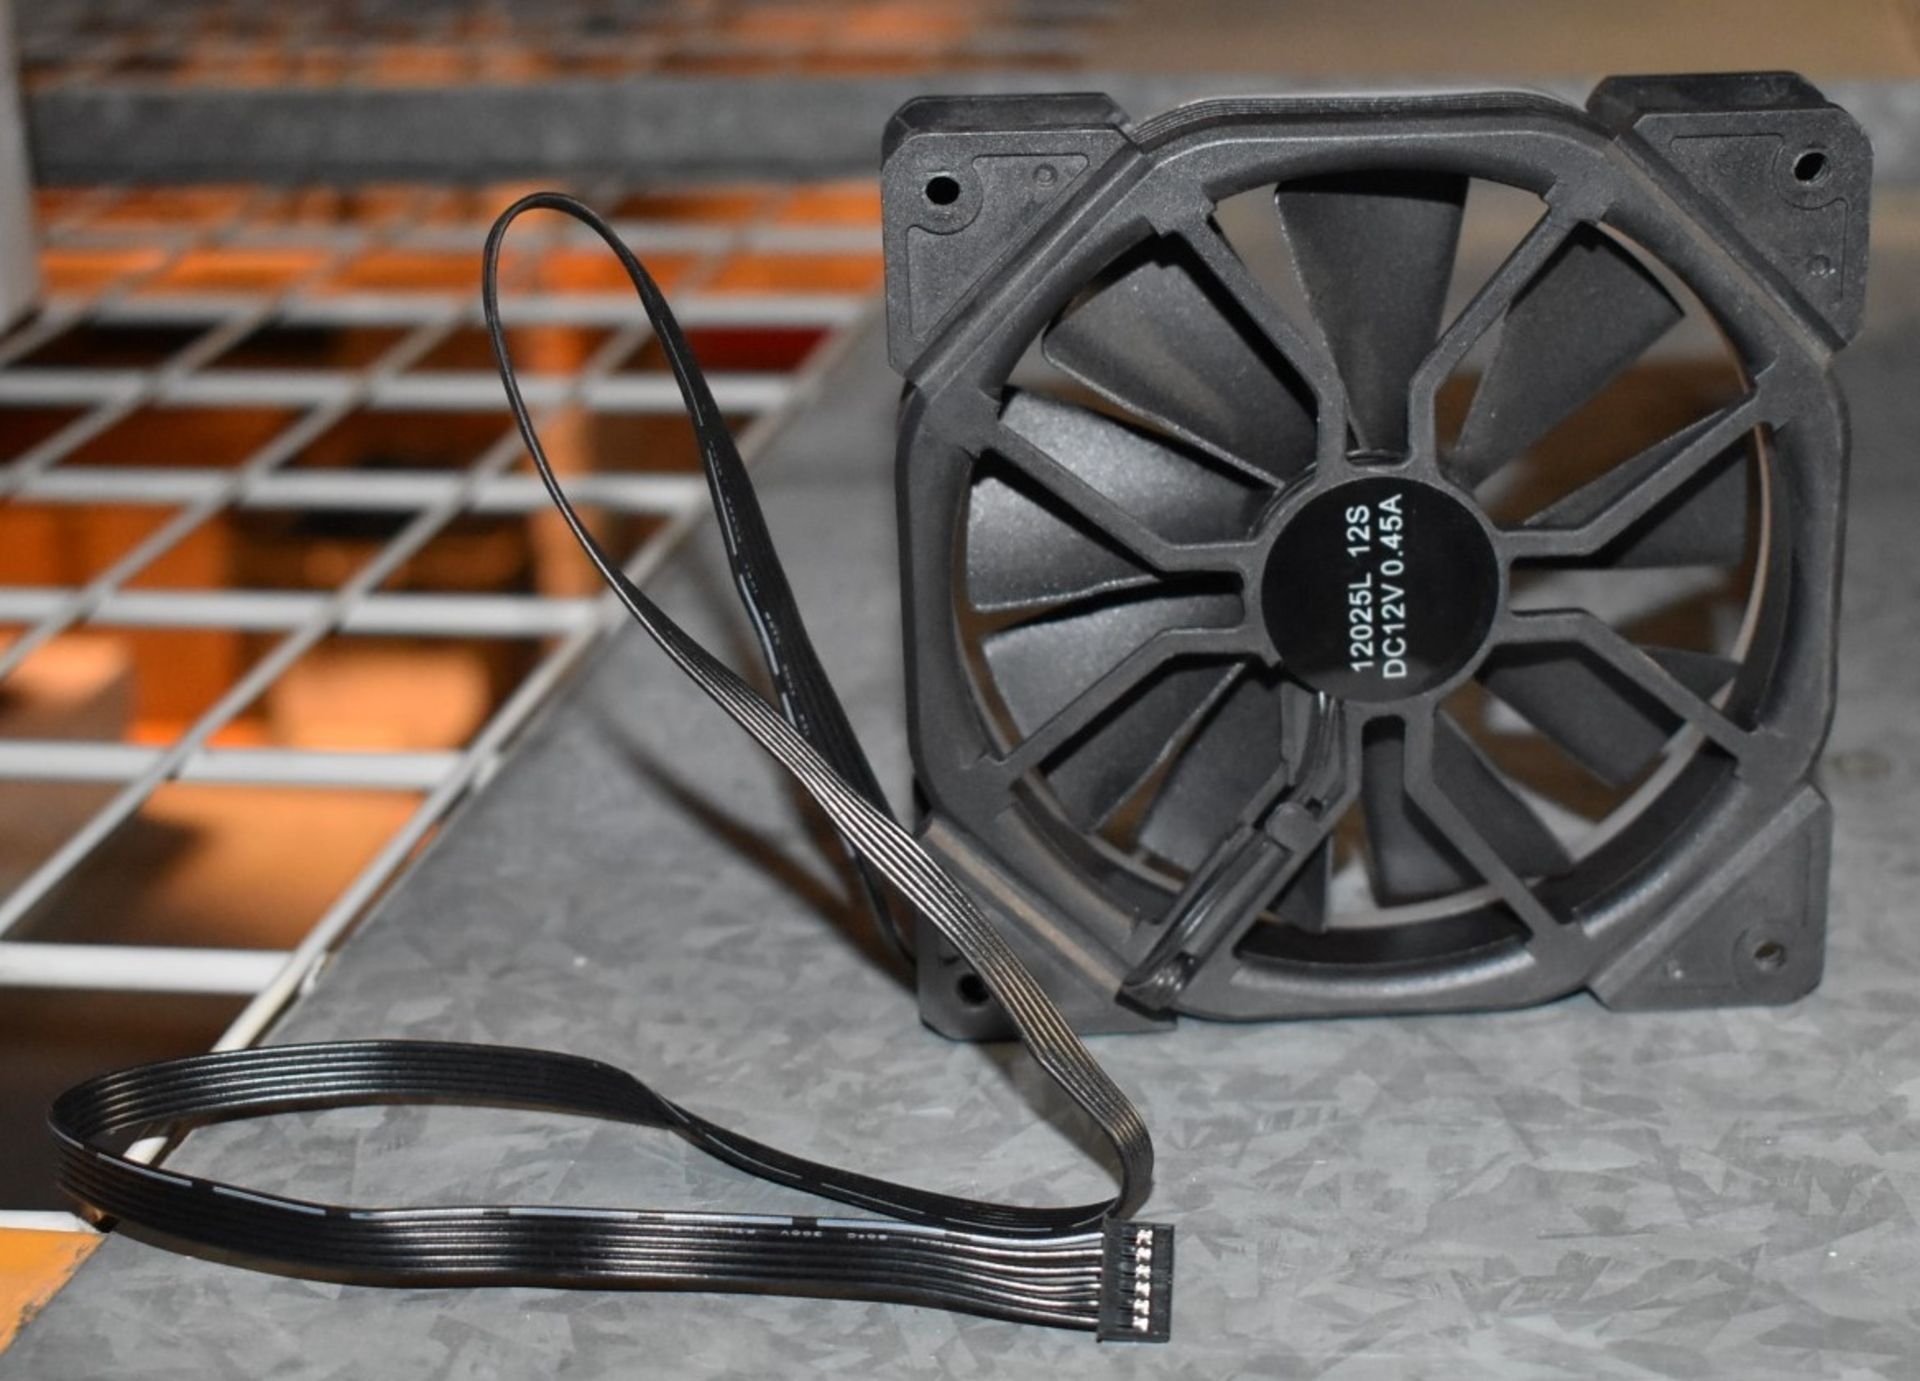 6 x Halo PC Gaming Case 120mm Cooling Fans - Dual-Ring, RGB LED, Hydro Bearing, 9 Blade Fan, For - Image 3 of 5